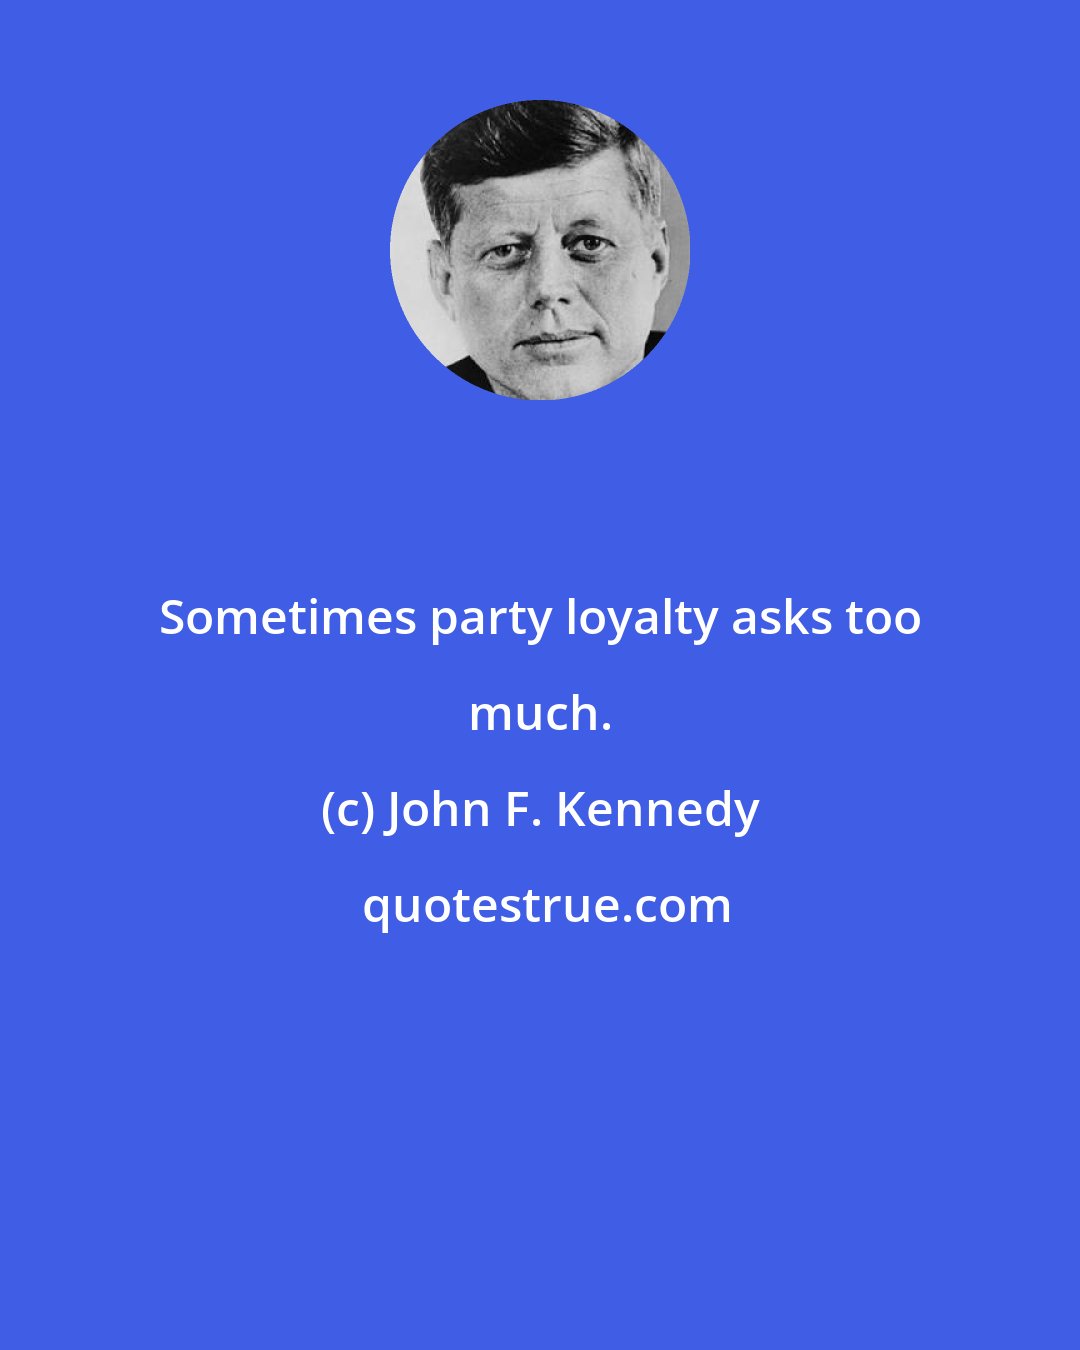 John F. Kennedy: Sometimes party loyalty asks too much.